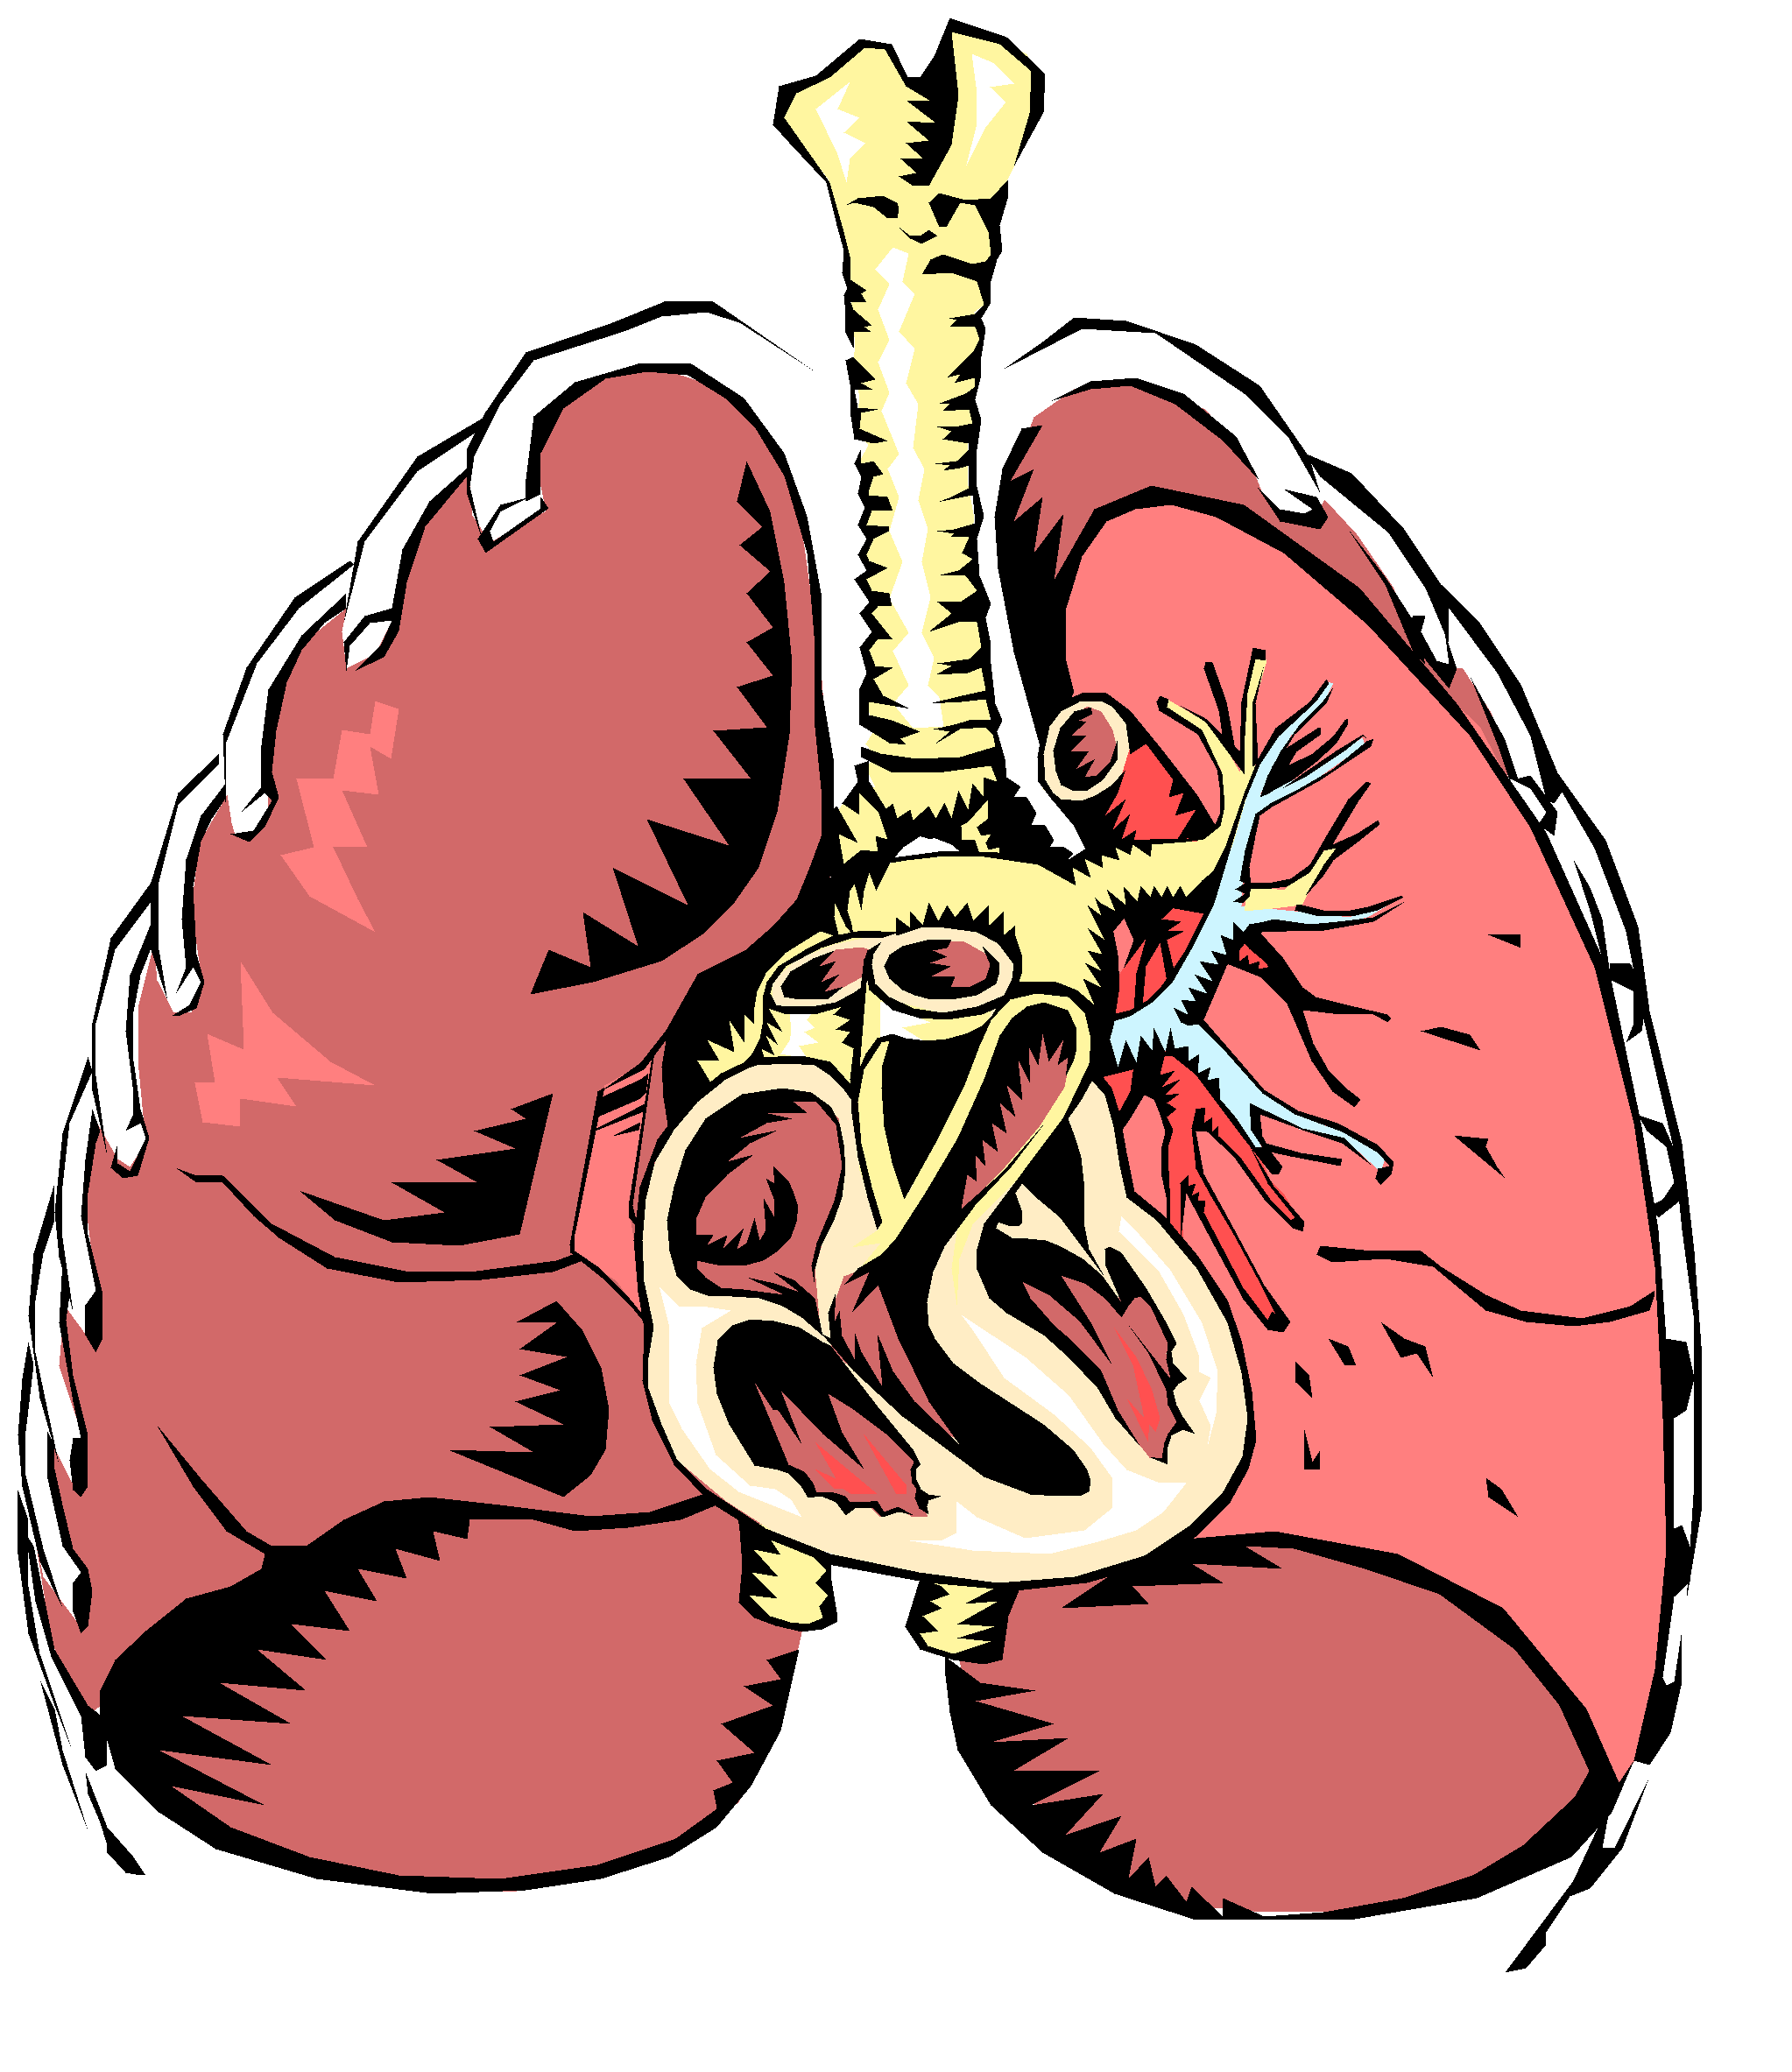 Respiratory System Cartoon Pictures - ClipArt Best